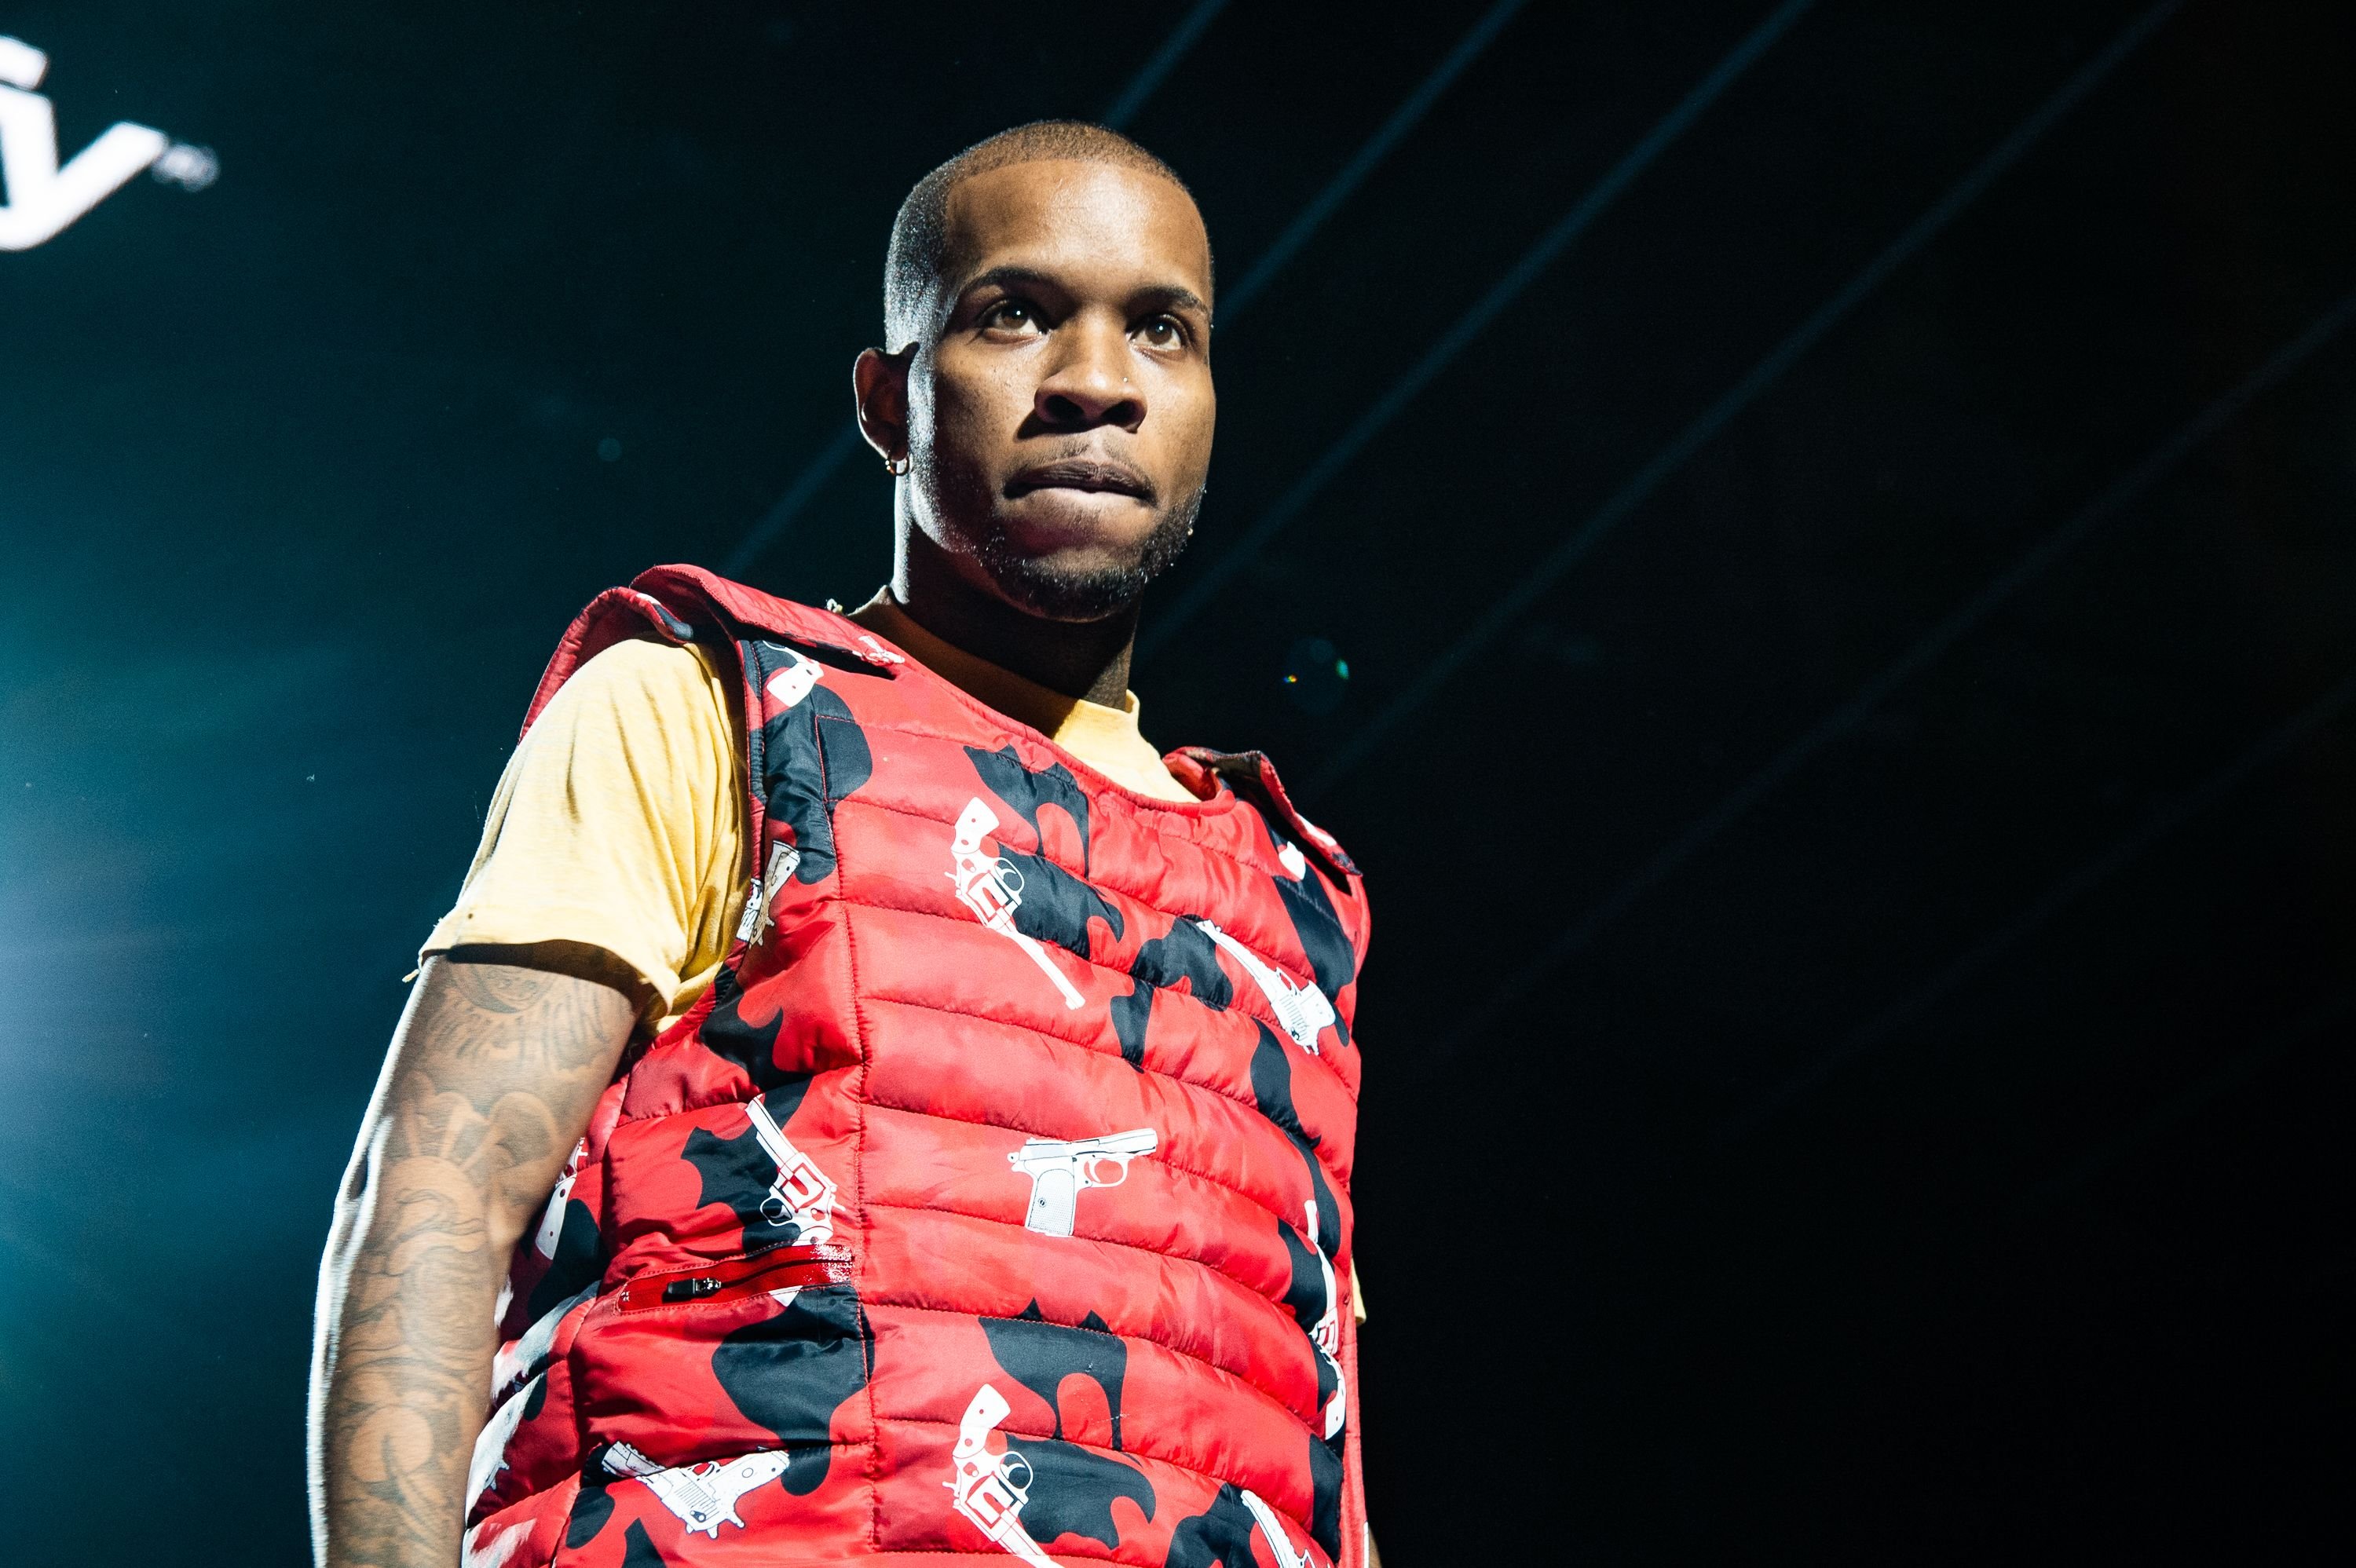 Tory Lanez performs at "Spotify Presents: Who We Be Live" at Alexandra Palace on November 28, 2018. | Photo: Getty Images